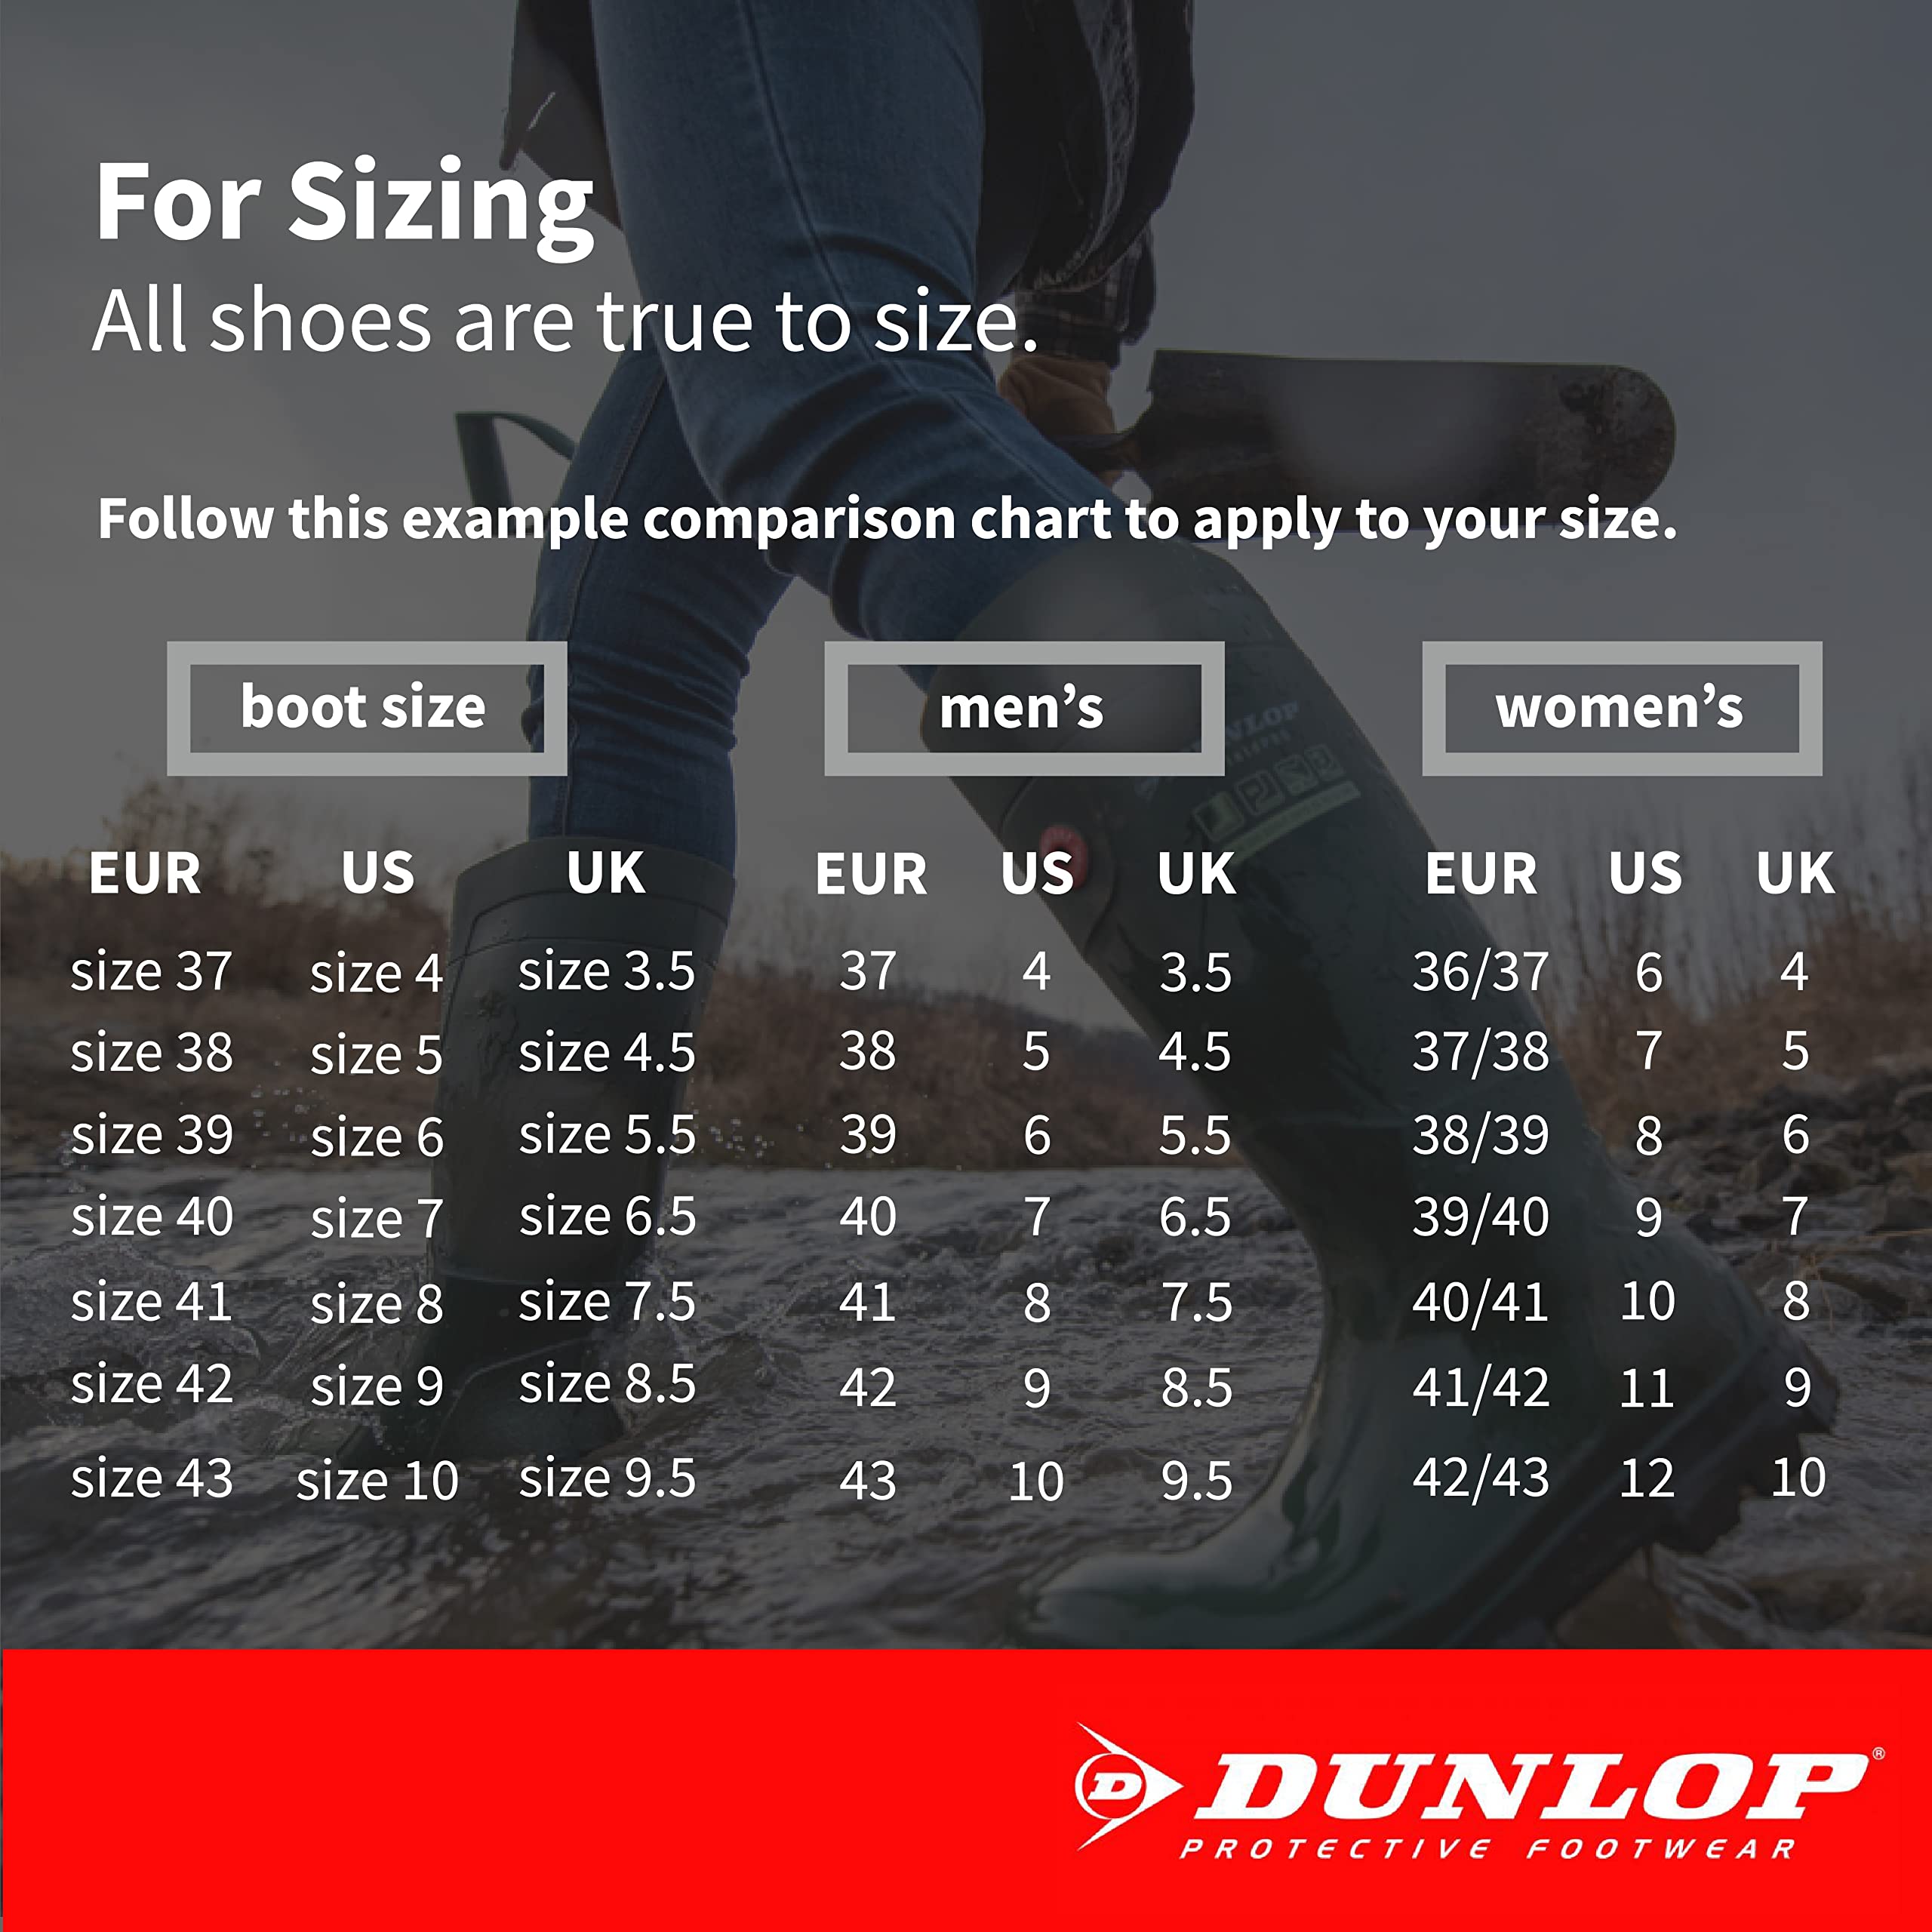 Dunlop Protective Footwear,Durapro Xcp Steel Toe, 100% Waterproof Polyblend PVC Material, Comfortable DURAPRO Energizing Insoles, Lightweight and Durable Protective Footwear, 8408600.12, Size 12 US